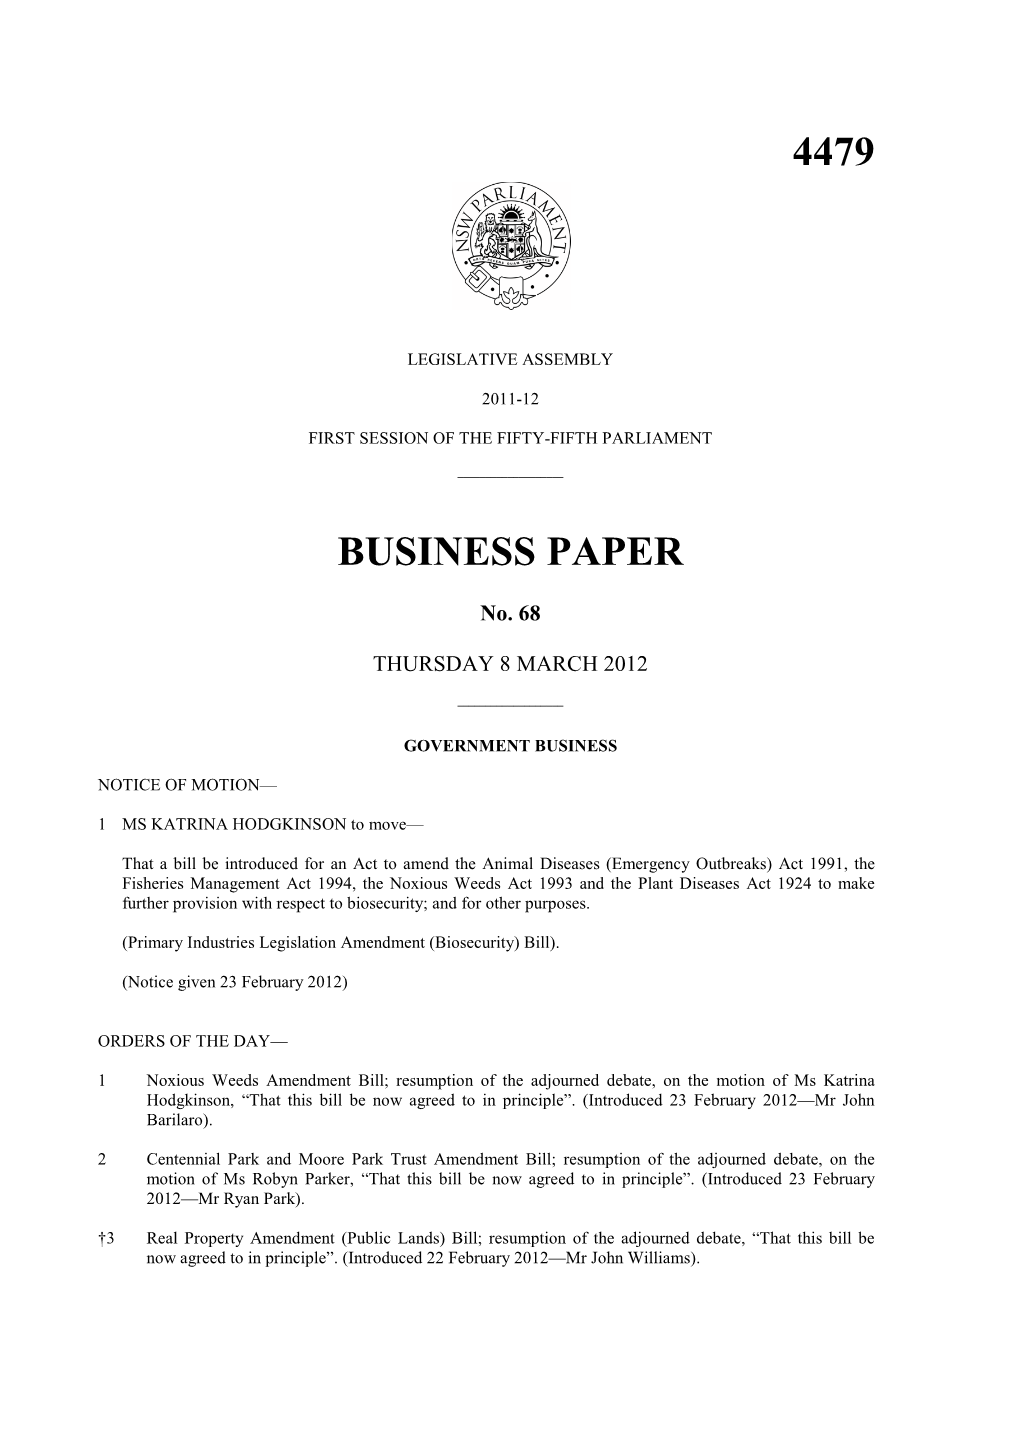 4479 Business Paper